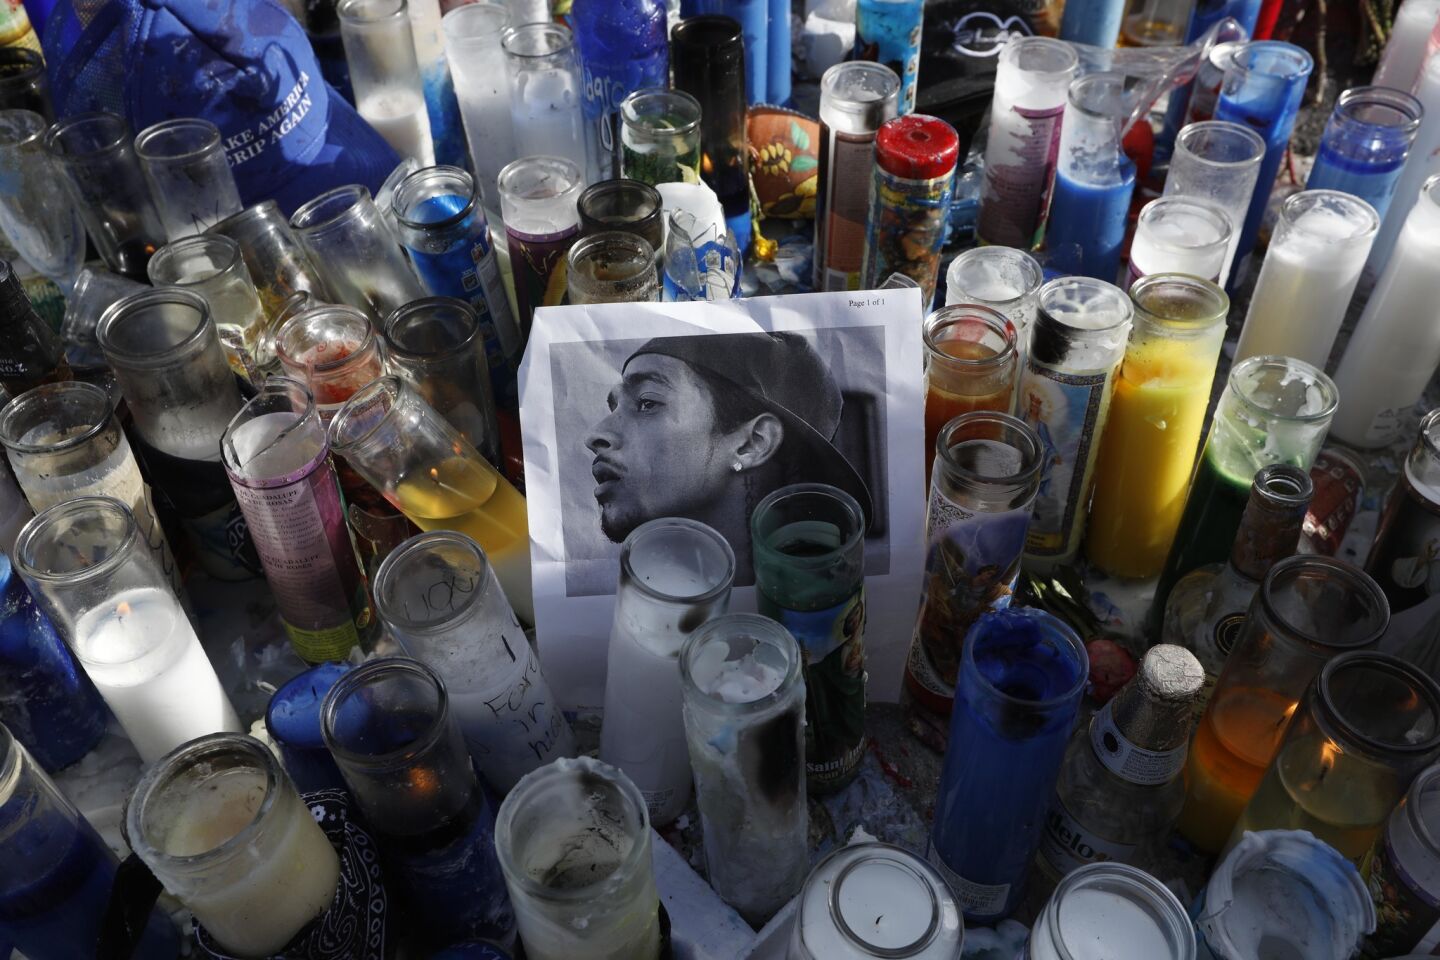 An image of Nipsey Hussle rests in a sea of candles as fans of the rapper pay their respects near the Marathon Clothing store in South Los Angeles on Monday.